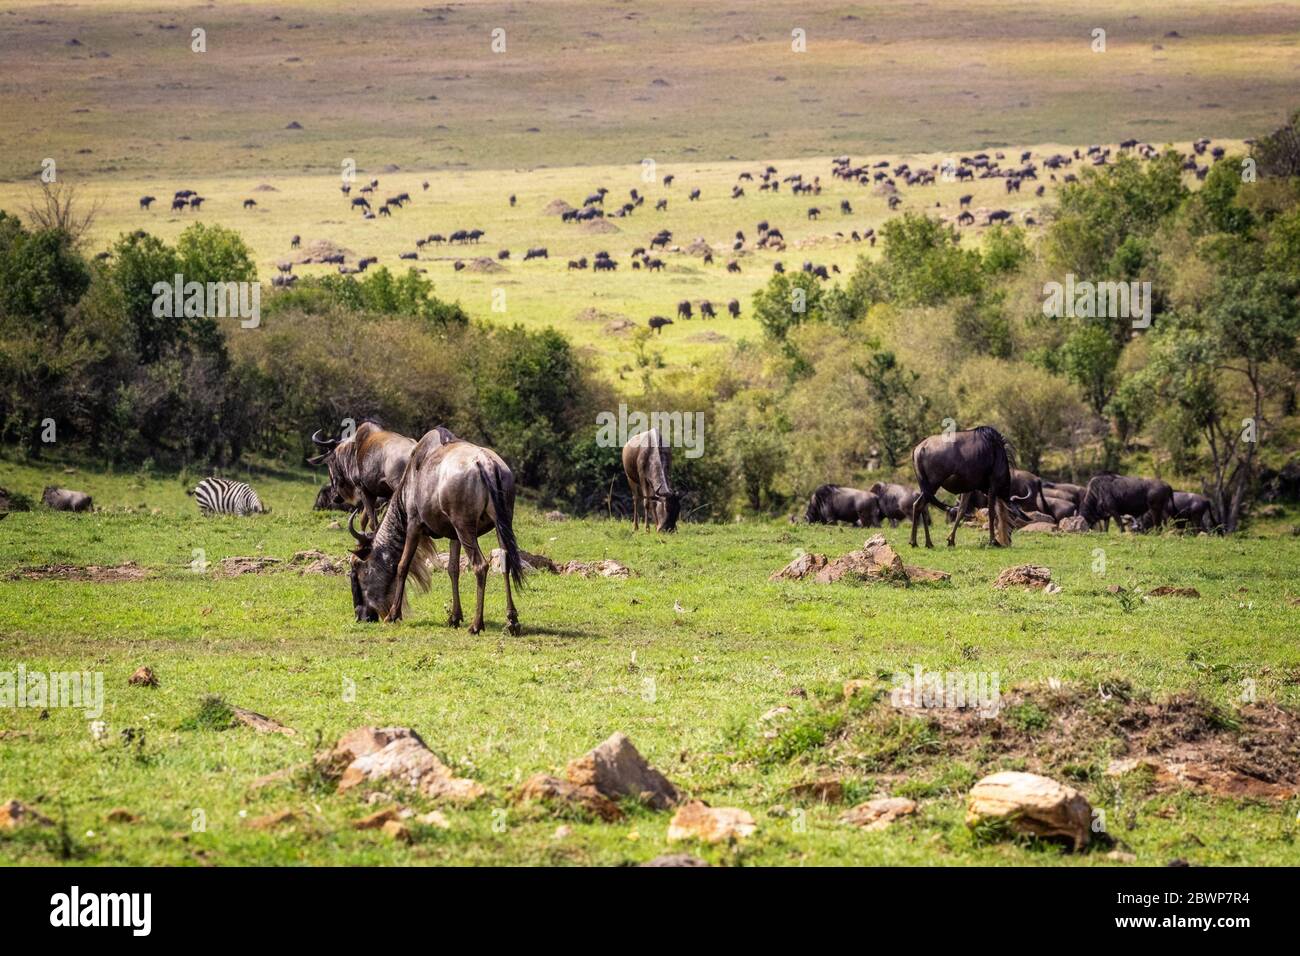 A large herd of wildebeest graze in a green grass field in the Mara Triangle Conservency, Kenya Africa during the annual migration seeason Stock Photo